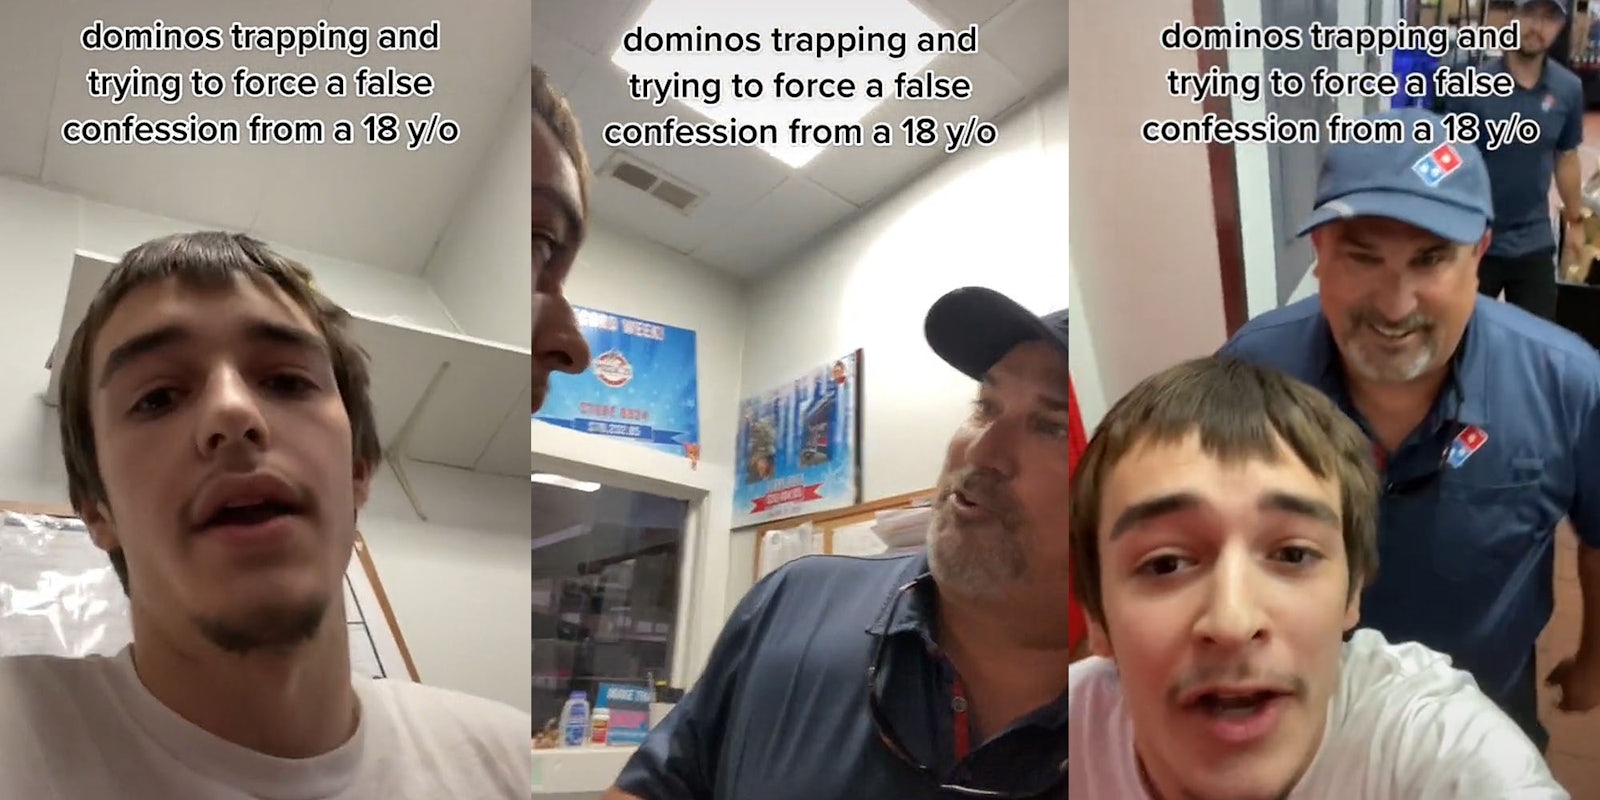 Dominos employee speaking caption 'dominos trapping and trying to force a false confession from a 18y/o' (l) Dominos manager and employee speaking face to face caption 'dominos trapping and trying to force a false confession from a 18y/o' (c) Dominos employee holding camera speaking manager behind smiling other worker behind manager caption 'dominos trapping and trying to force a false confession from a 18y/o' (r)